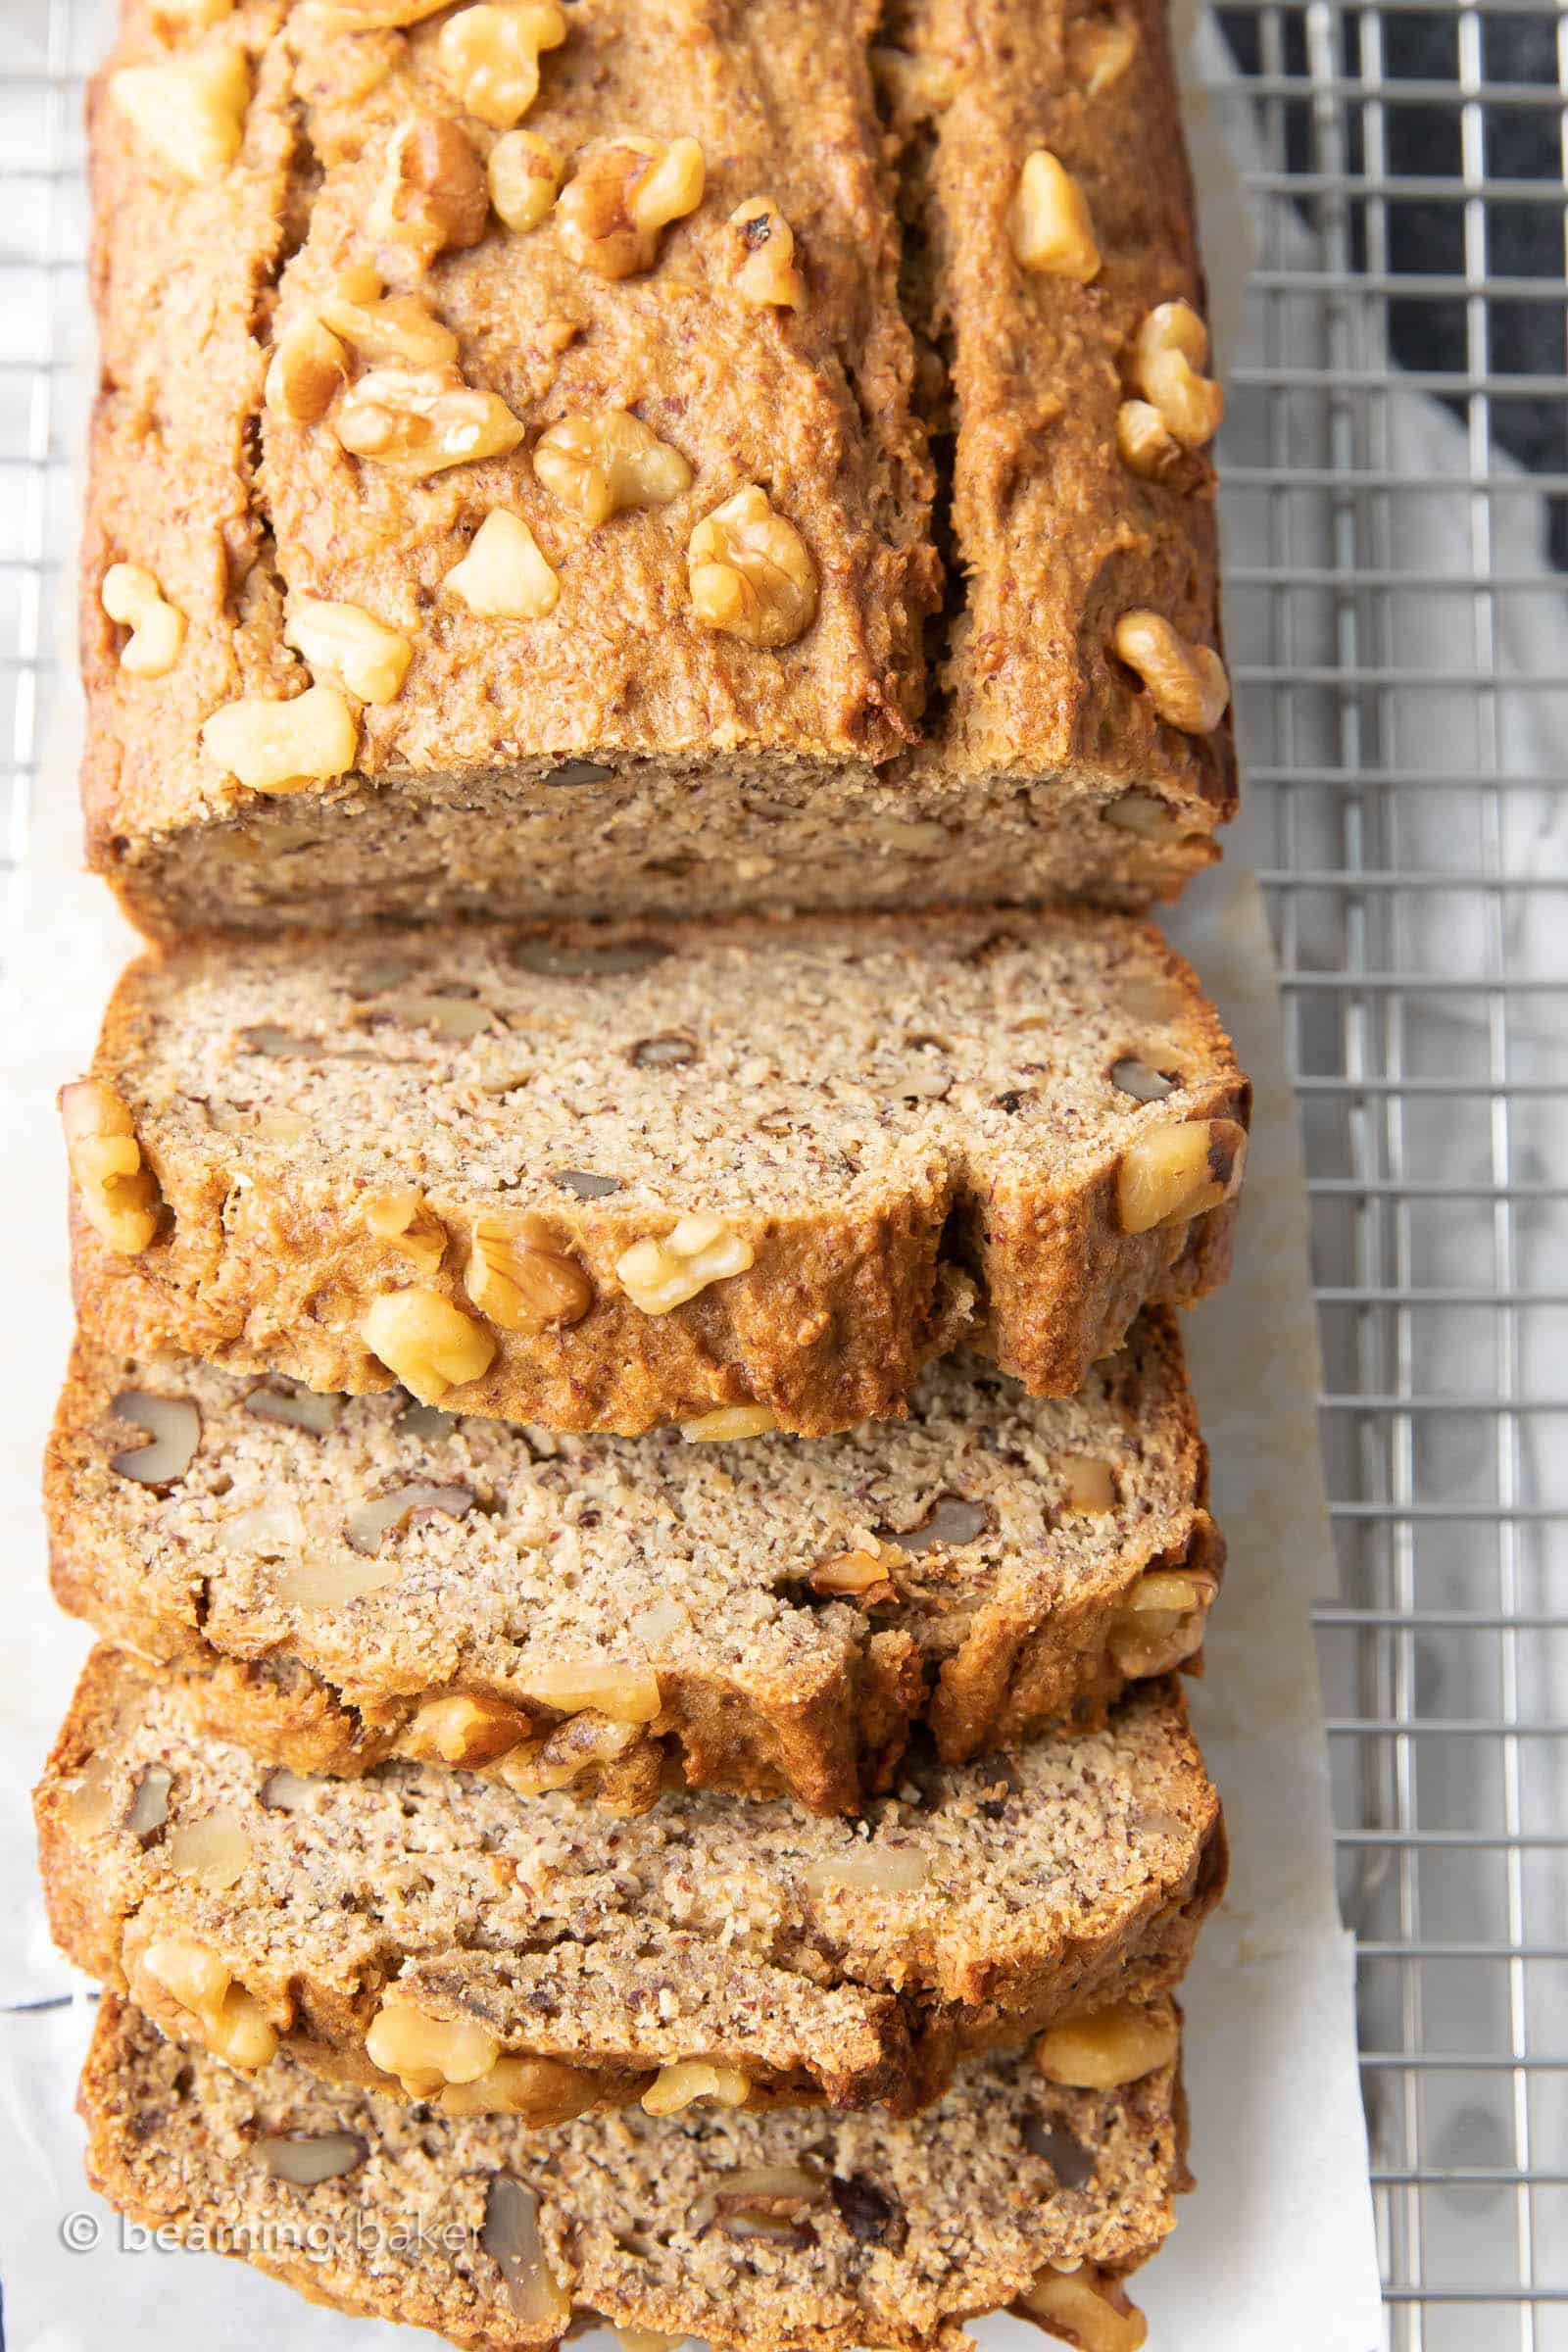 Healthy Banana Bread Recipe: unbelievably delicious banana bread that just so happens to be healthy! Moist ‘n rich with cozy banana flavor and incredible texture—you won’t be able to resist! #BananaBread #Healthy #Banana | Recipe at BeamingBaker.com